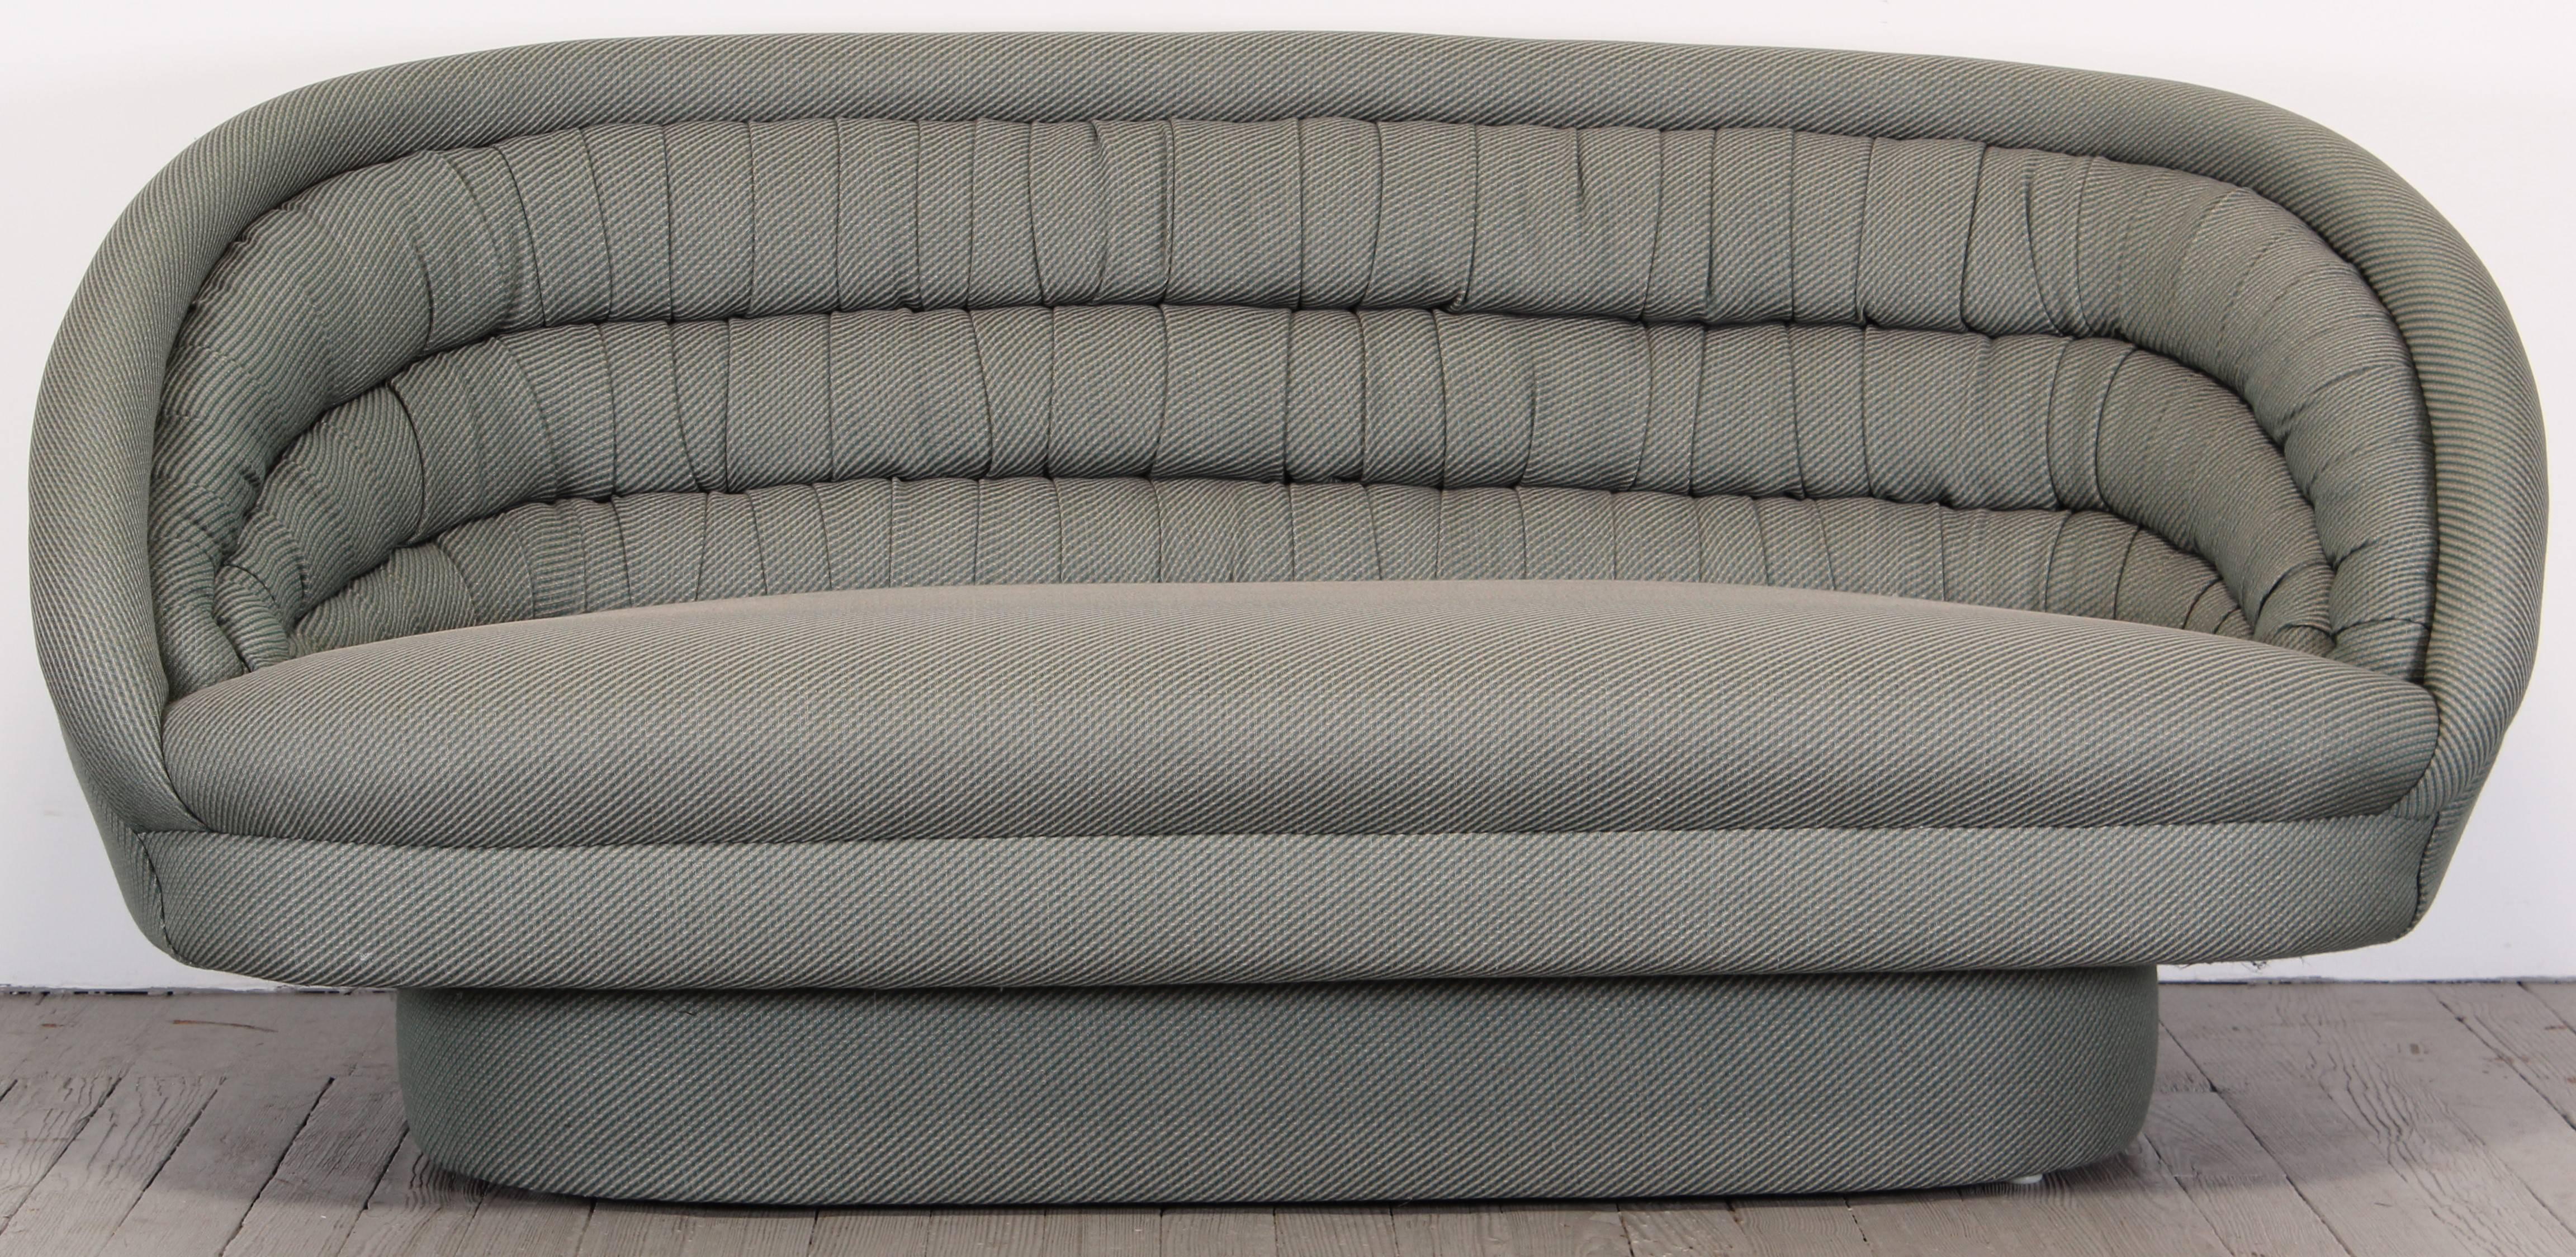 A "Crescent" sofa designed by Vladimir Kagan. The sofa is structurally sound, approximately 15 year old fabric is in very good condition.